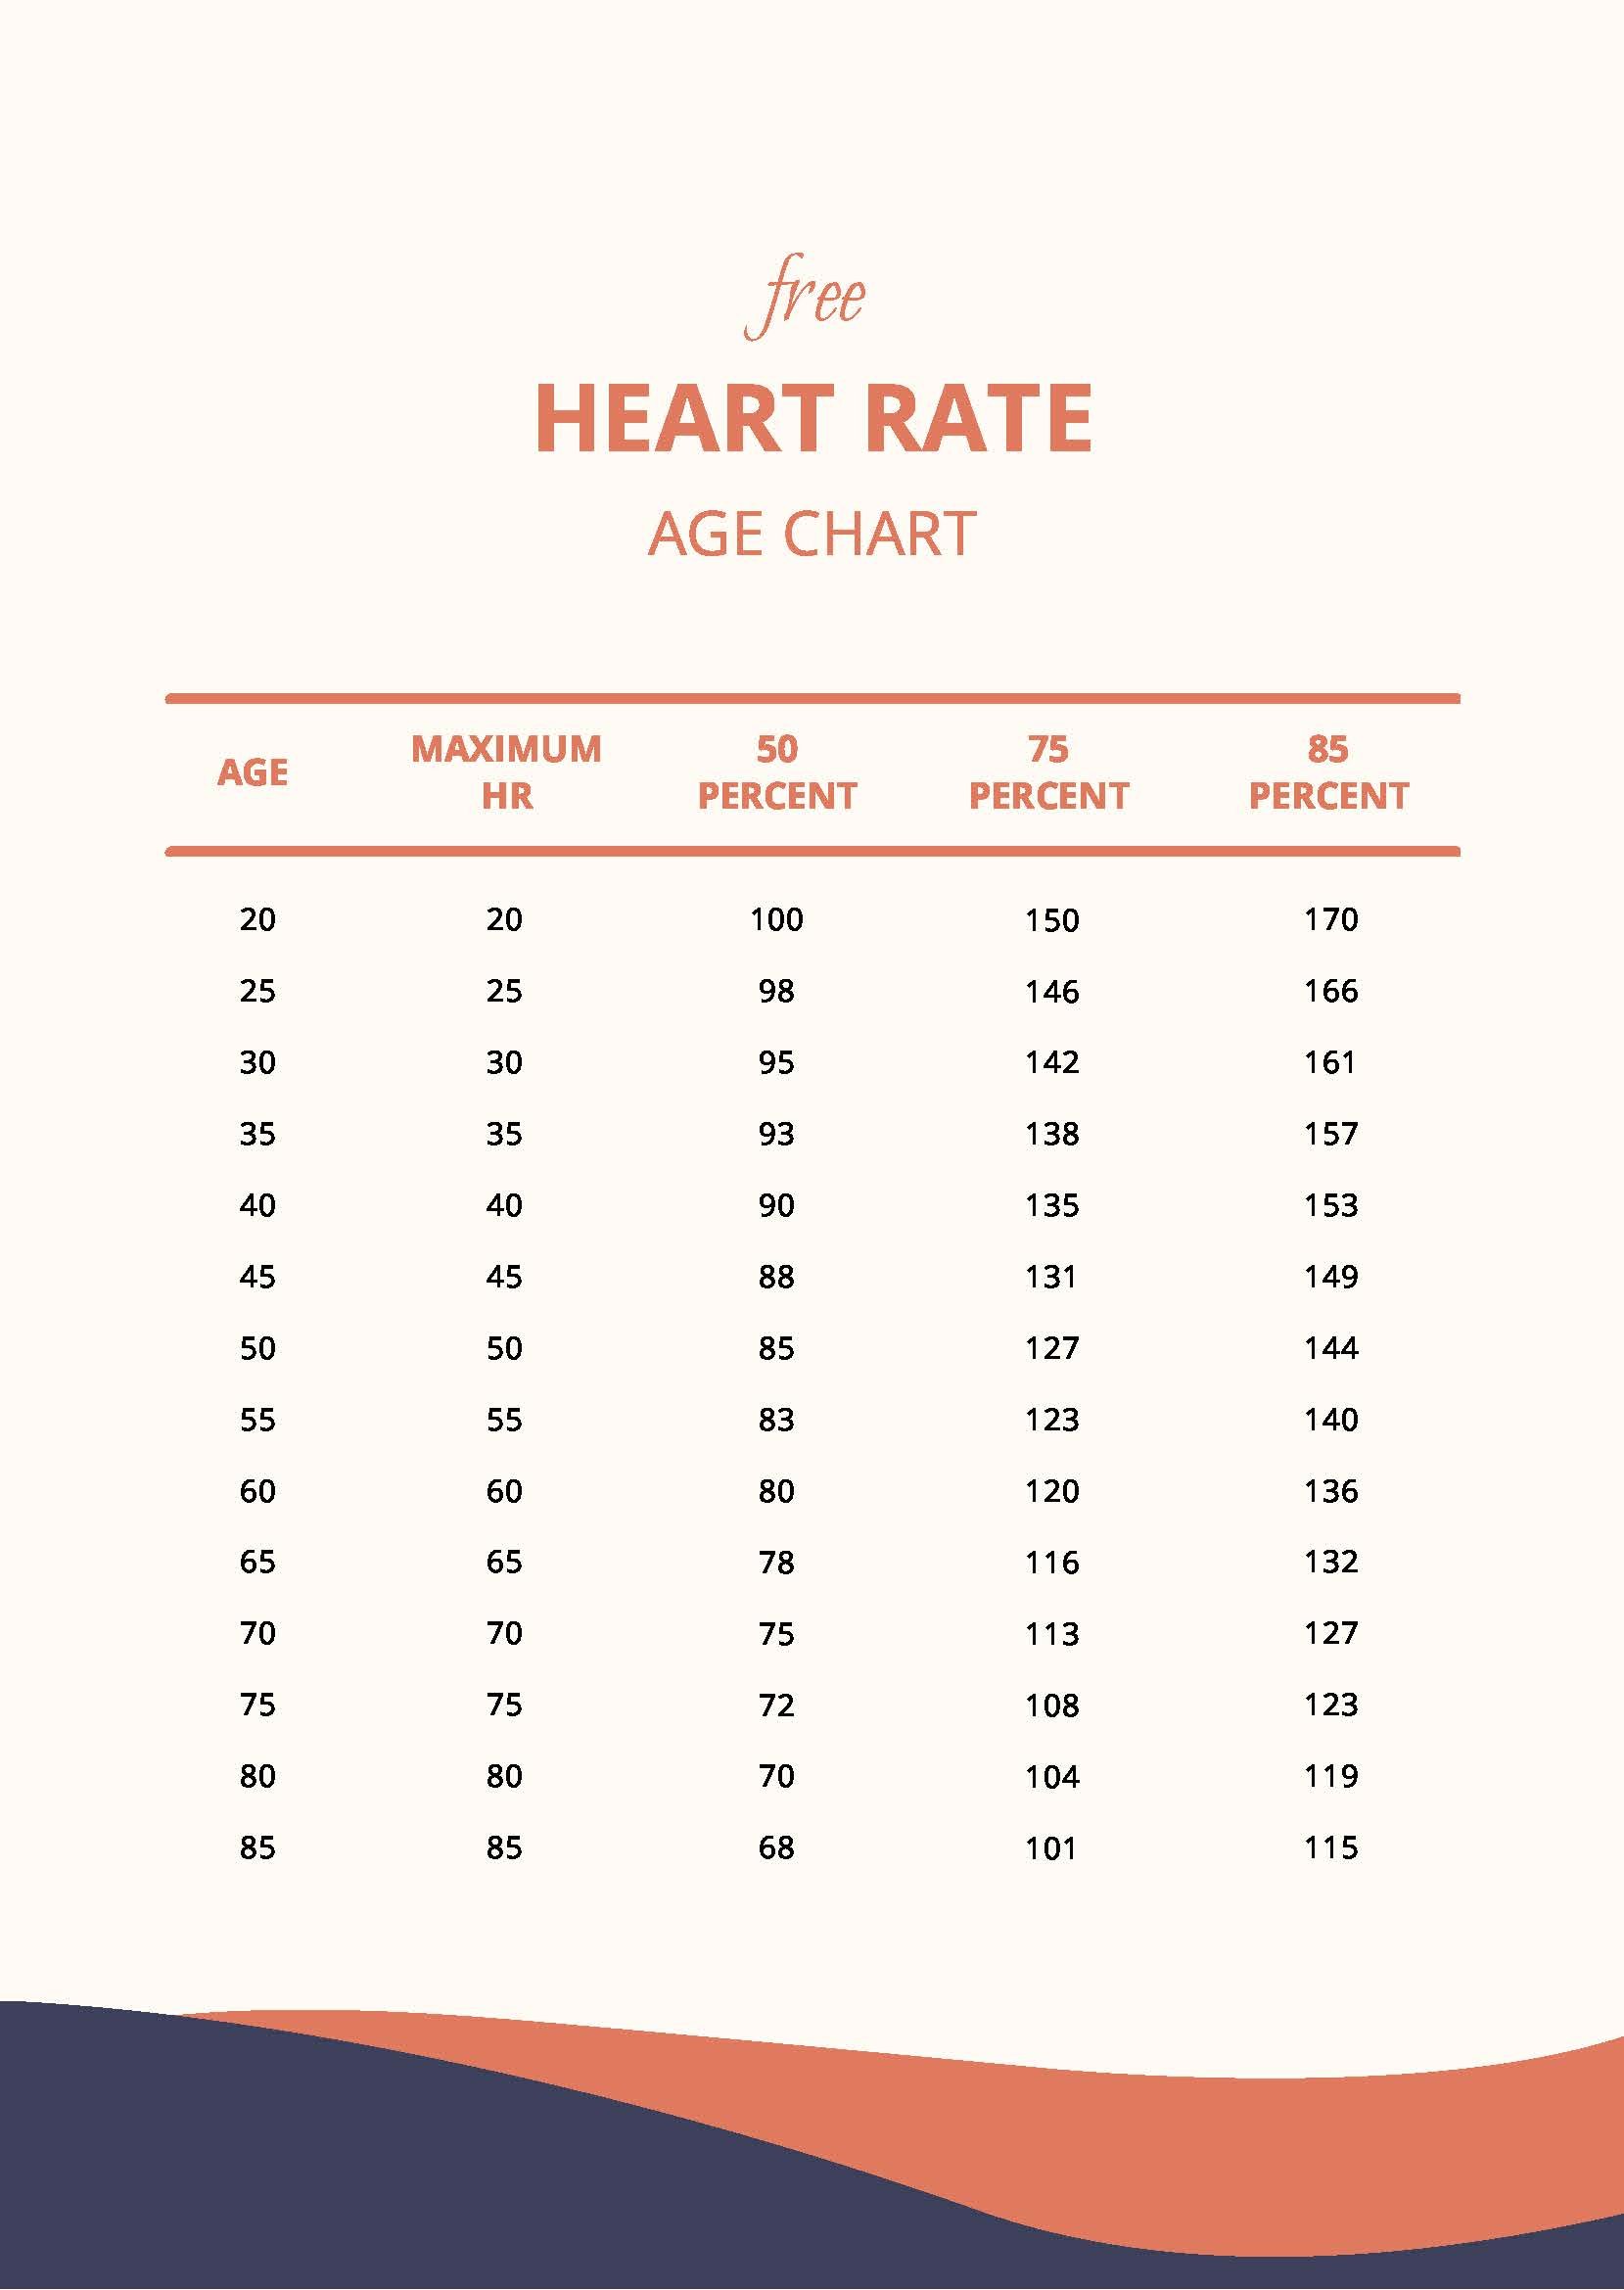 Heart Rate Age Chart